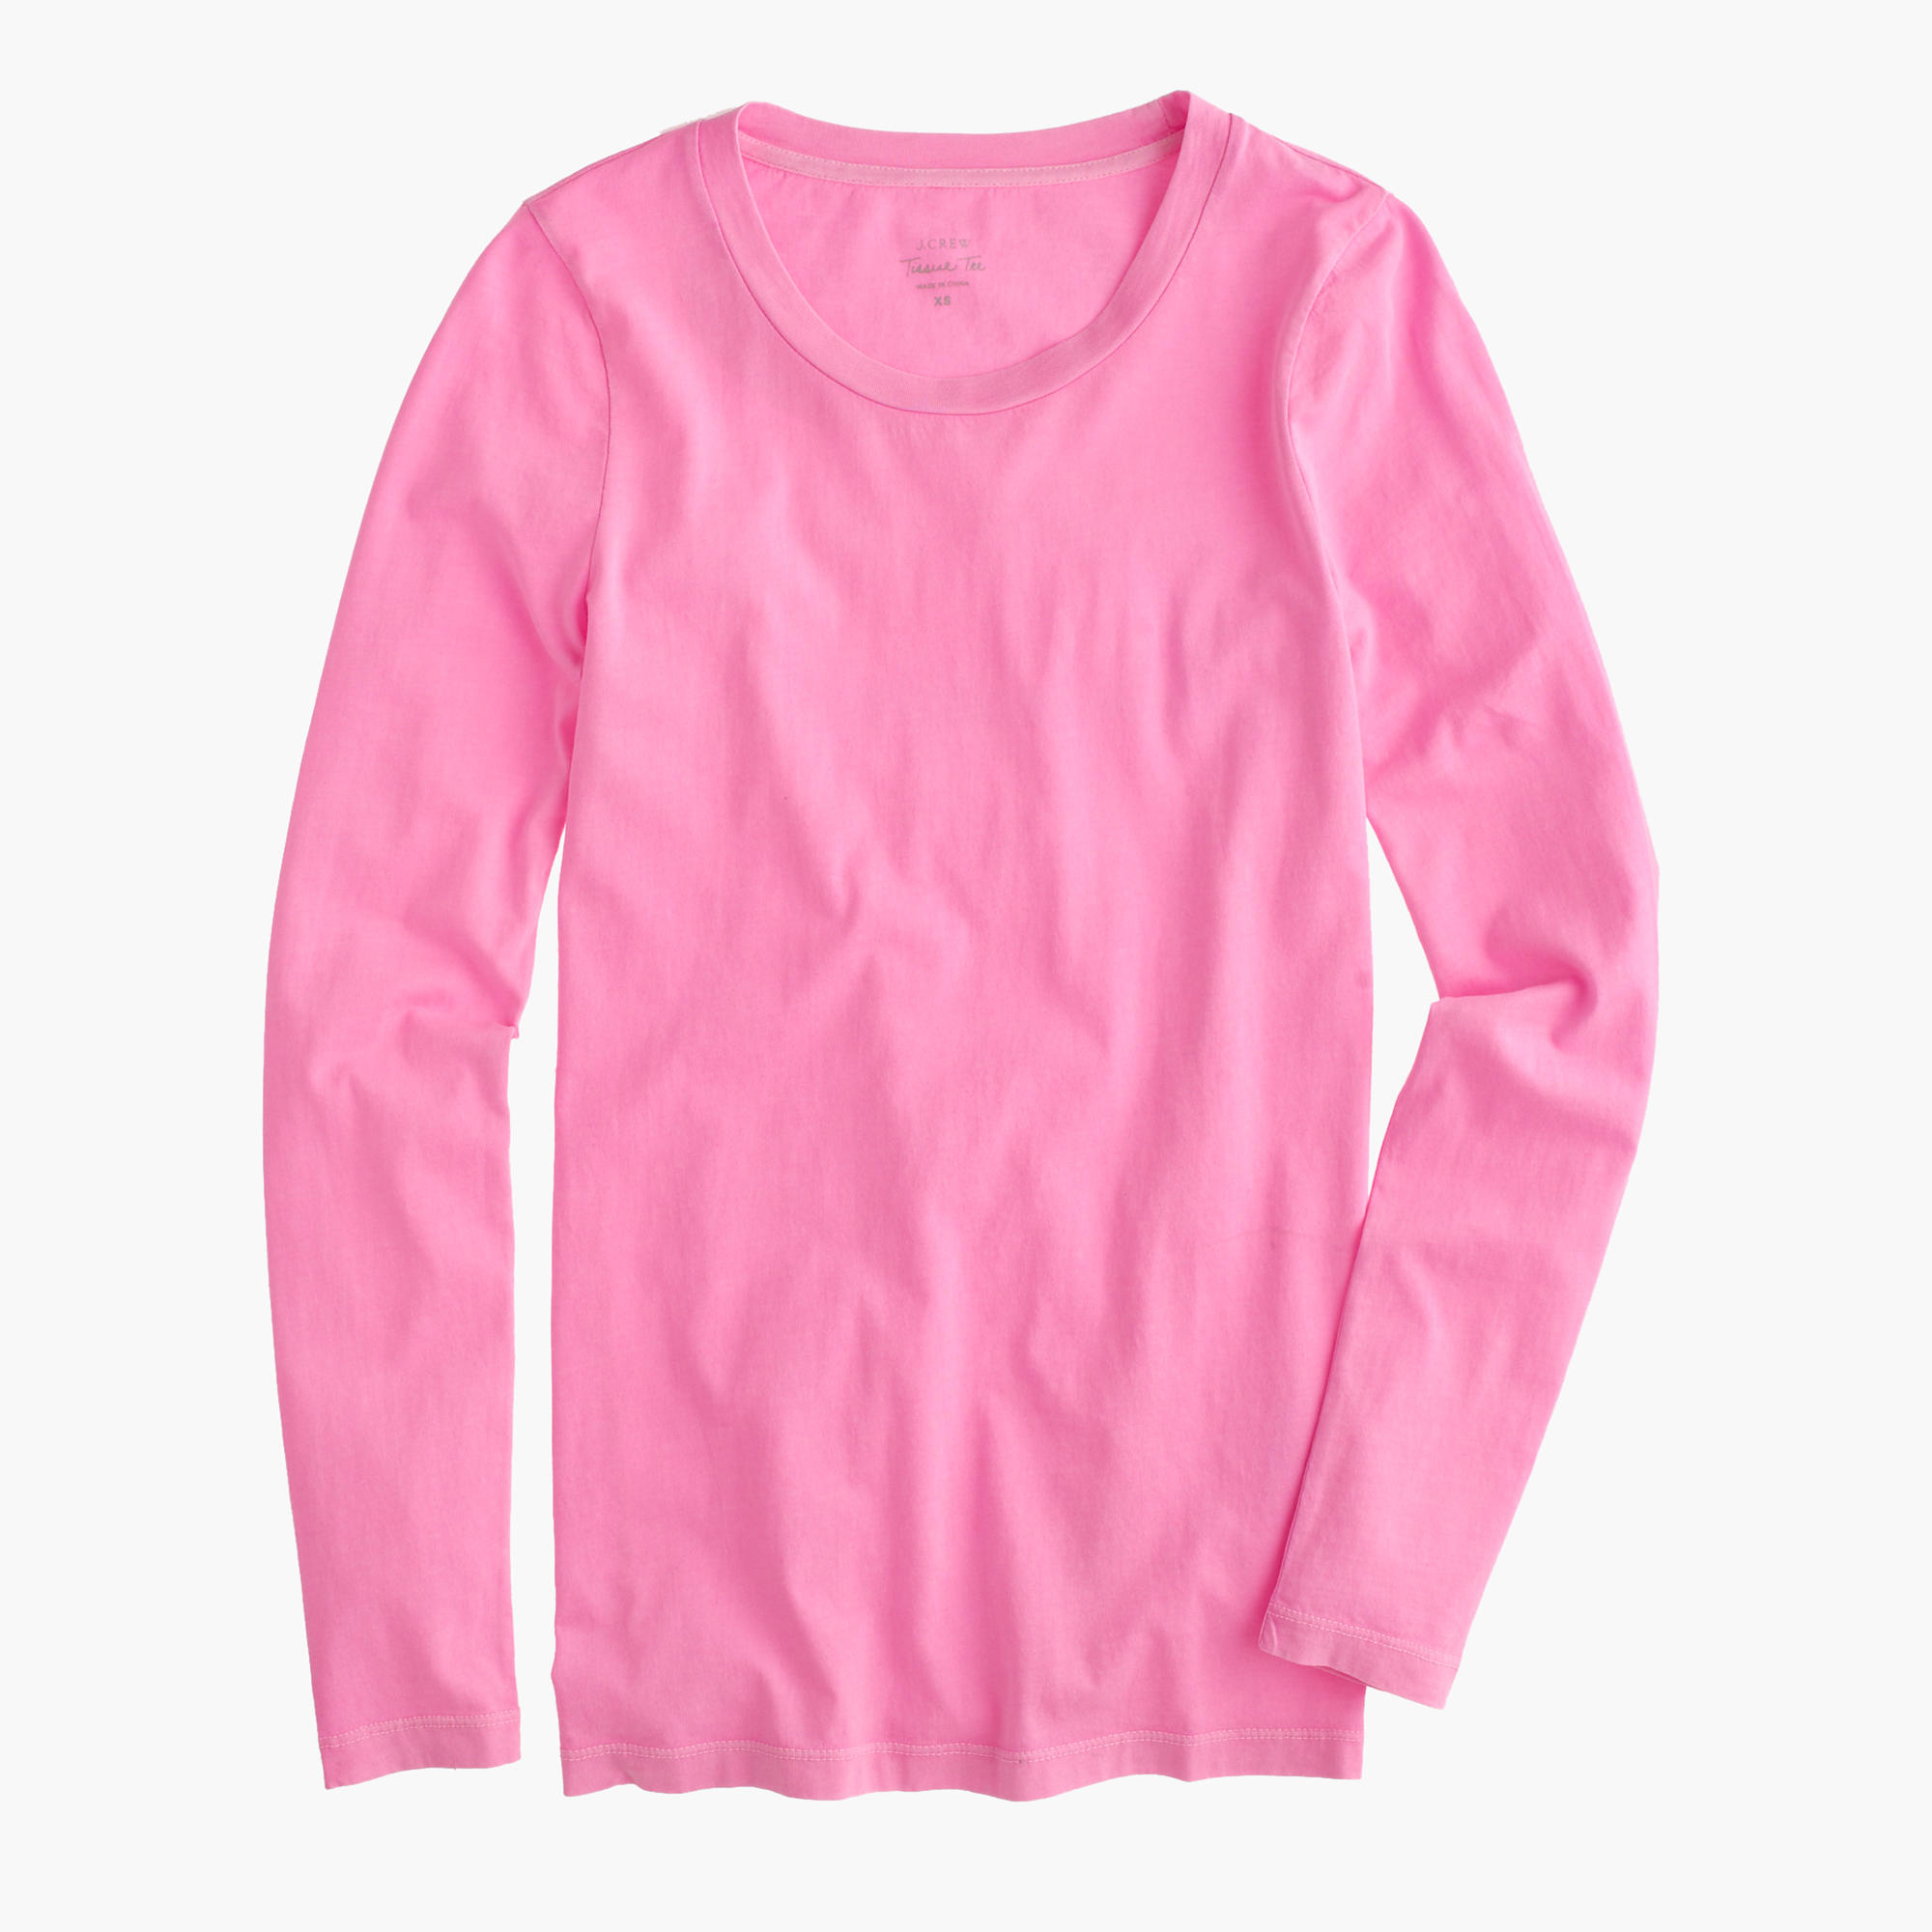 J.crew Tissue Long-sleeve T-shirt in Pink (neon peppermint) | Lyst